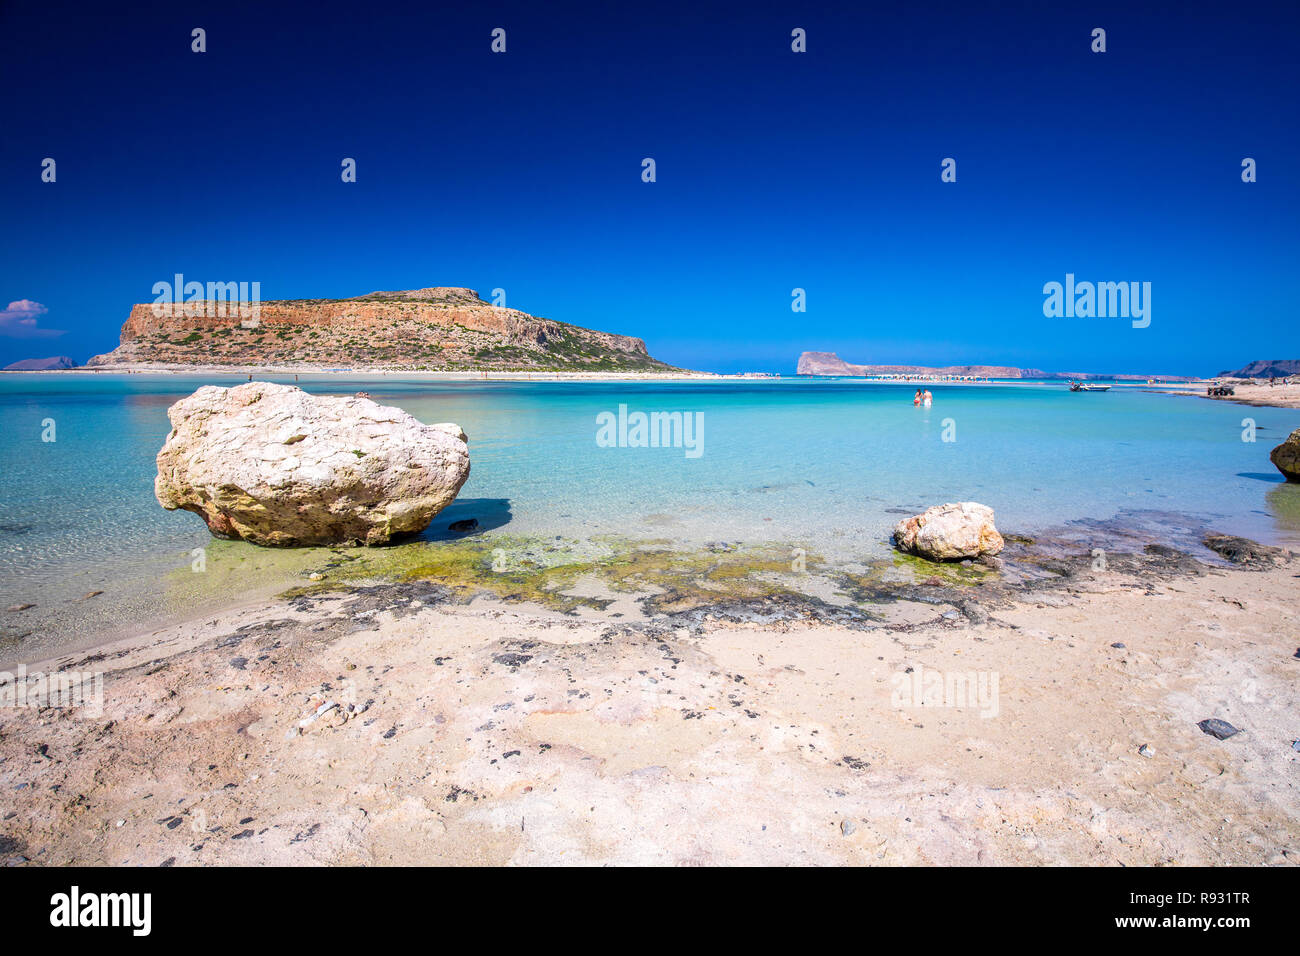 Balos lagoon on Crete island with azure clear water, Greece, Europe. Crete is the largest and most populous of the Greek islands. Stock Photo